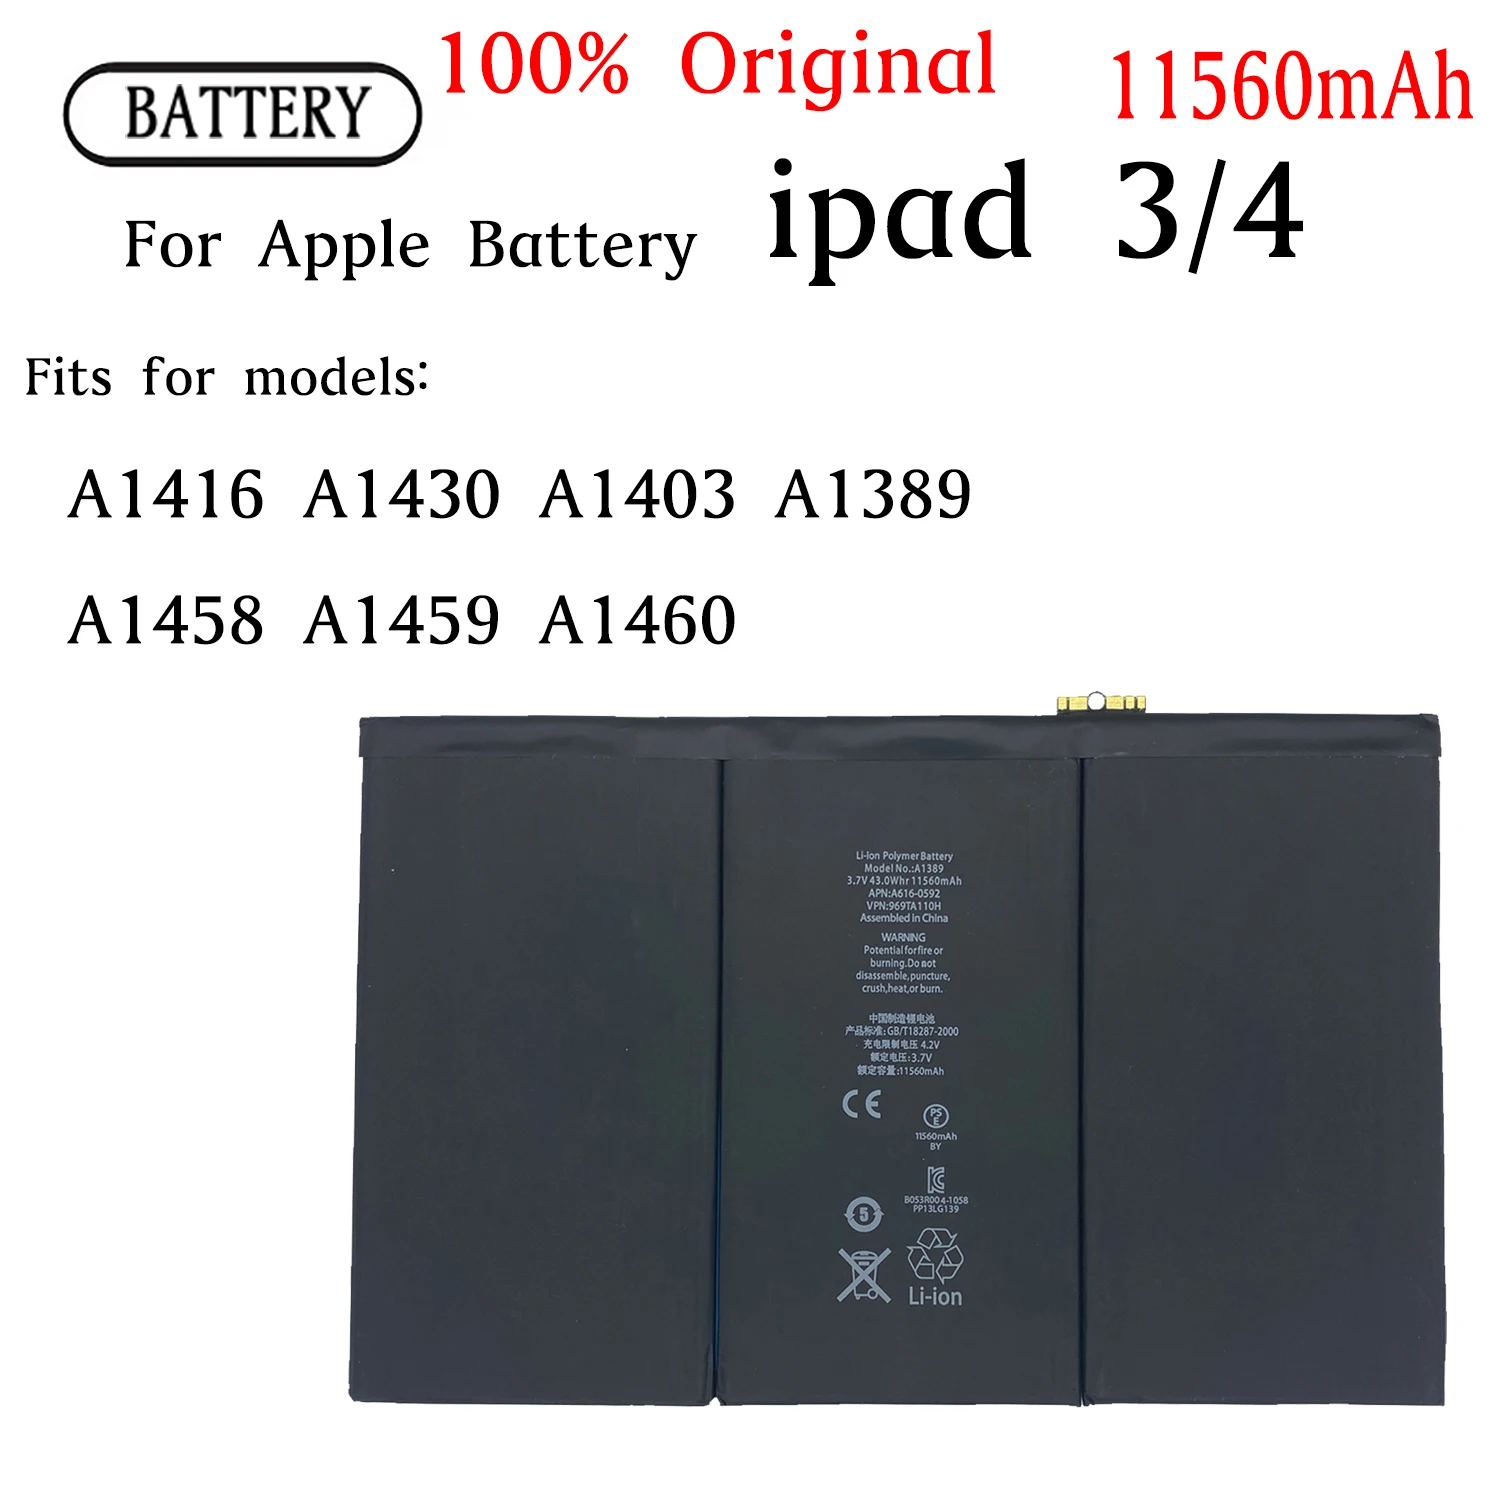 Tool New OEM Replacement Battery for iPad 3 4 3rd 4th Gen A1389 A1430 11560mAh 